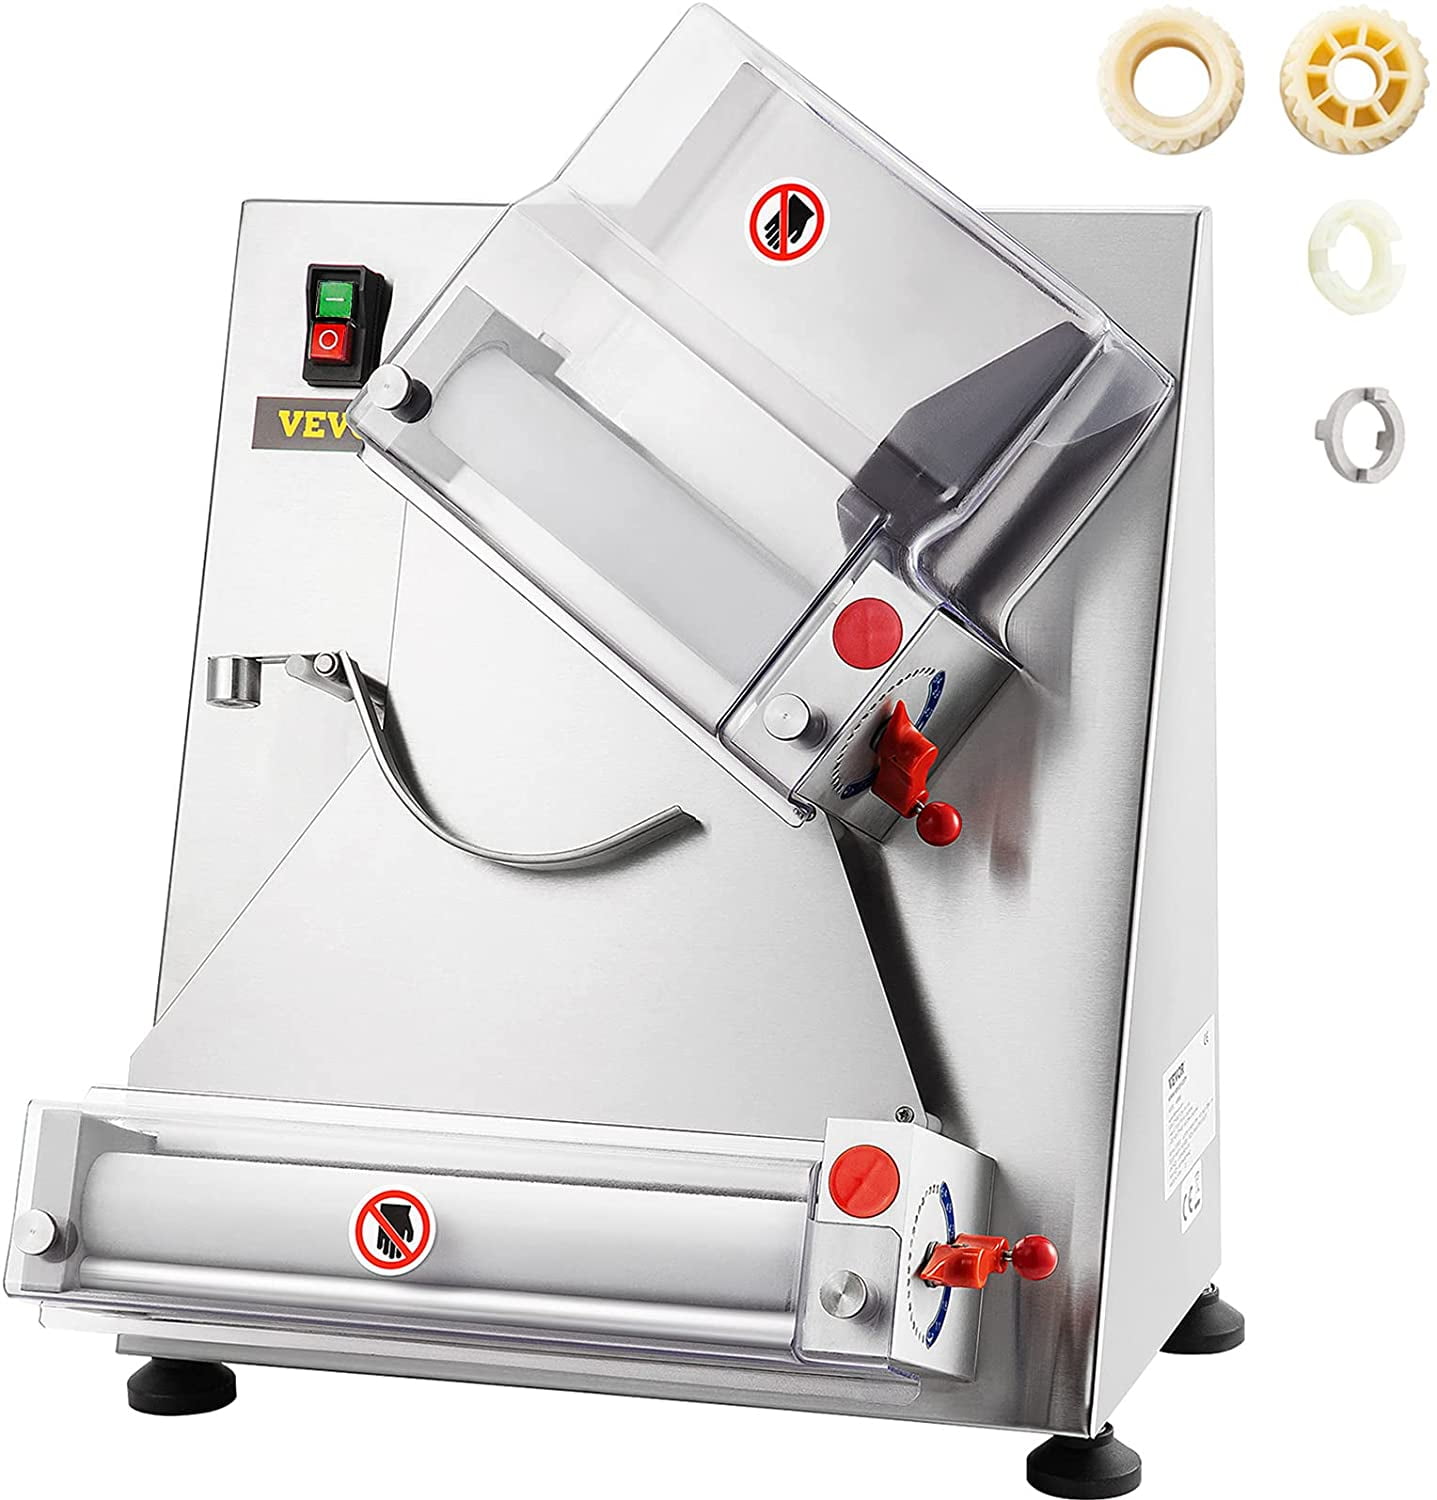 15 Dough Roller Sheeter Commercial Dough Presses Machine Automatic Electric Pizza Press Making Machine Heavy Duty Pasta Maker Equipment for Rolling of Pizza and Various Dough Cake About 5s/ for Dough